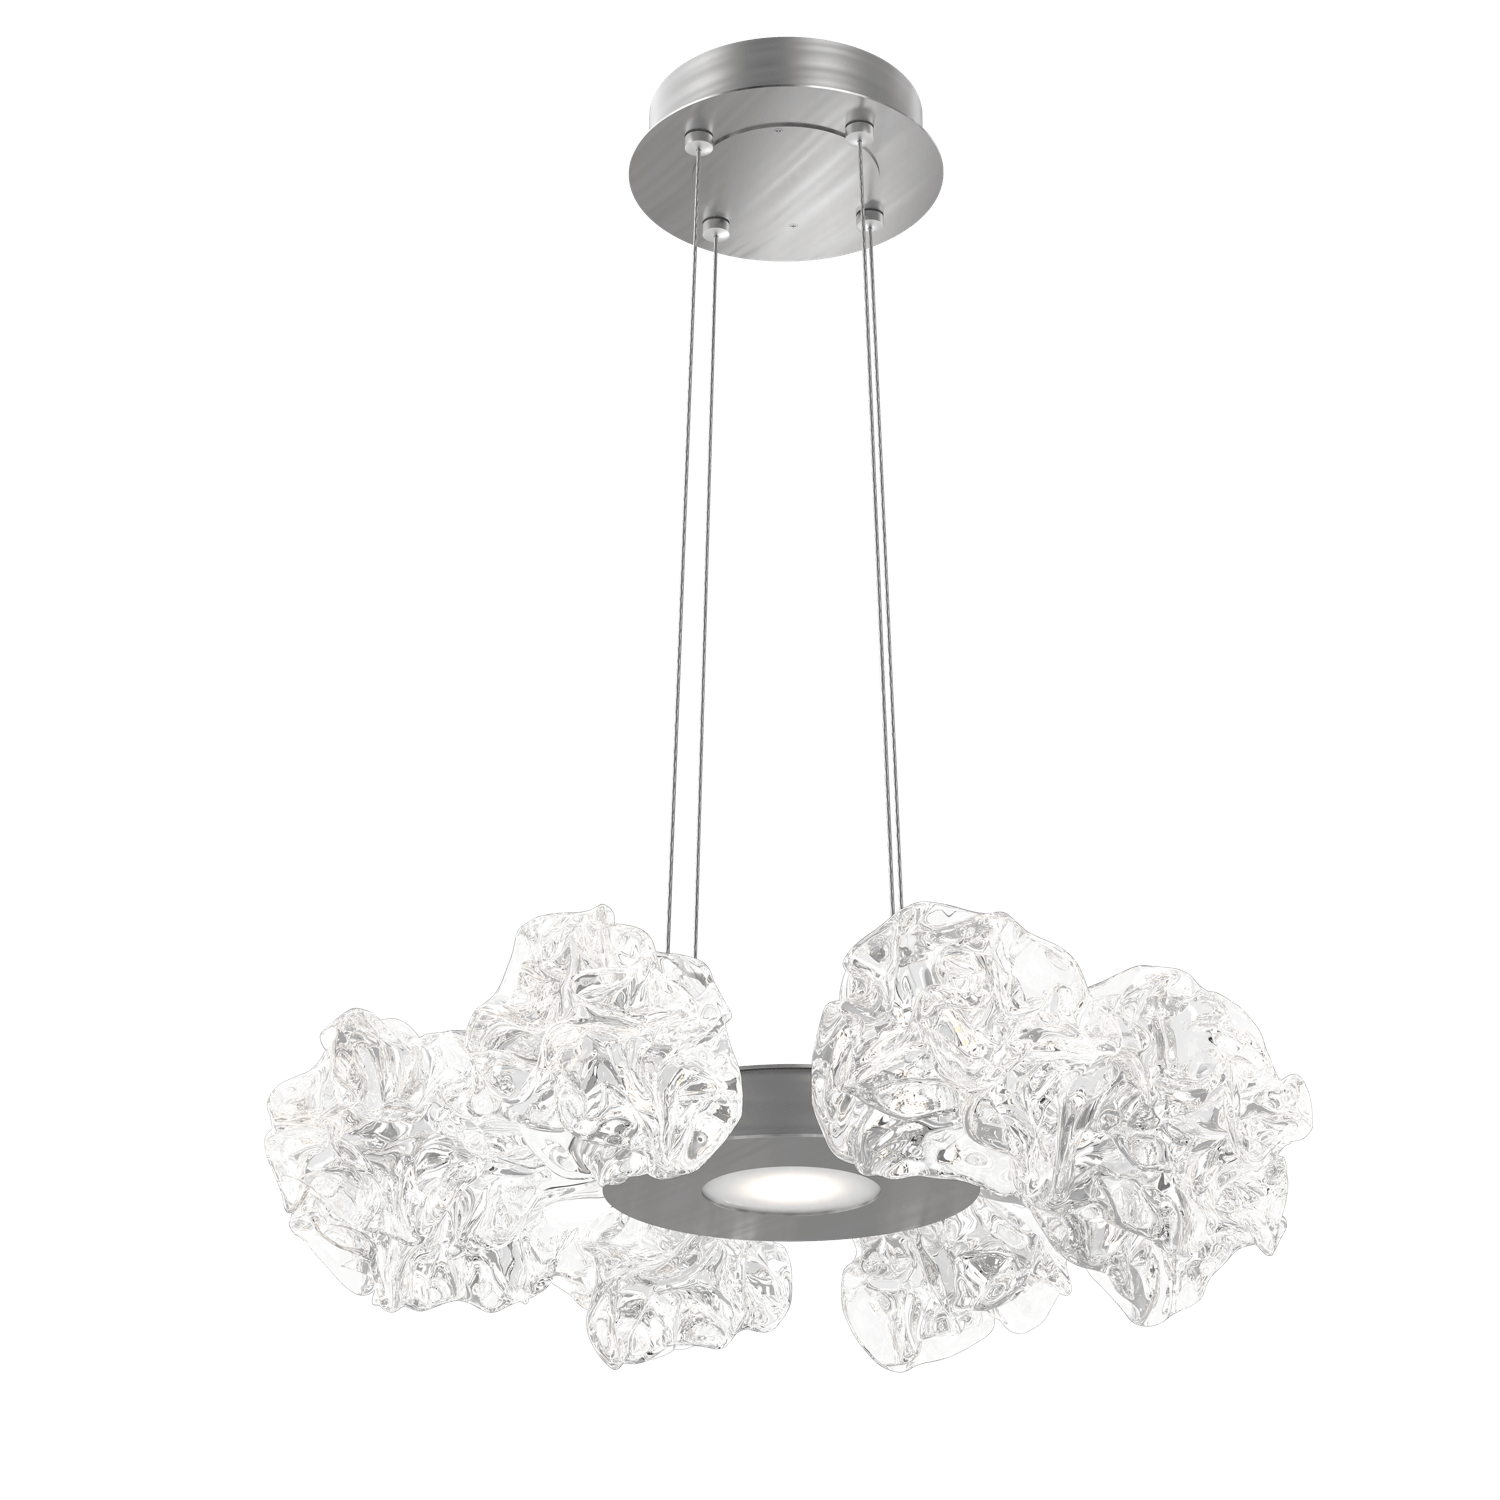 CHB0059-24-SN-Hammerton-Studio-Blossom-24-inch-radial-ring-chandelier-with-satin-nickel-finish-and-clear-handblown-crystal-glass-shades-and-LED-lamping